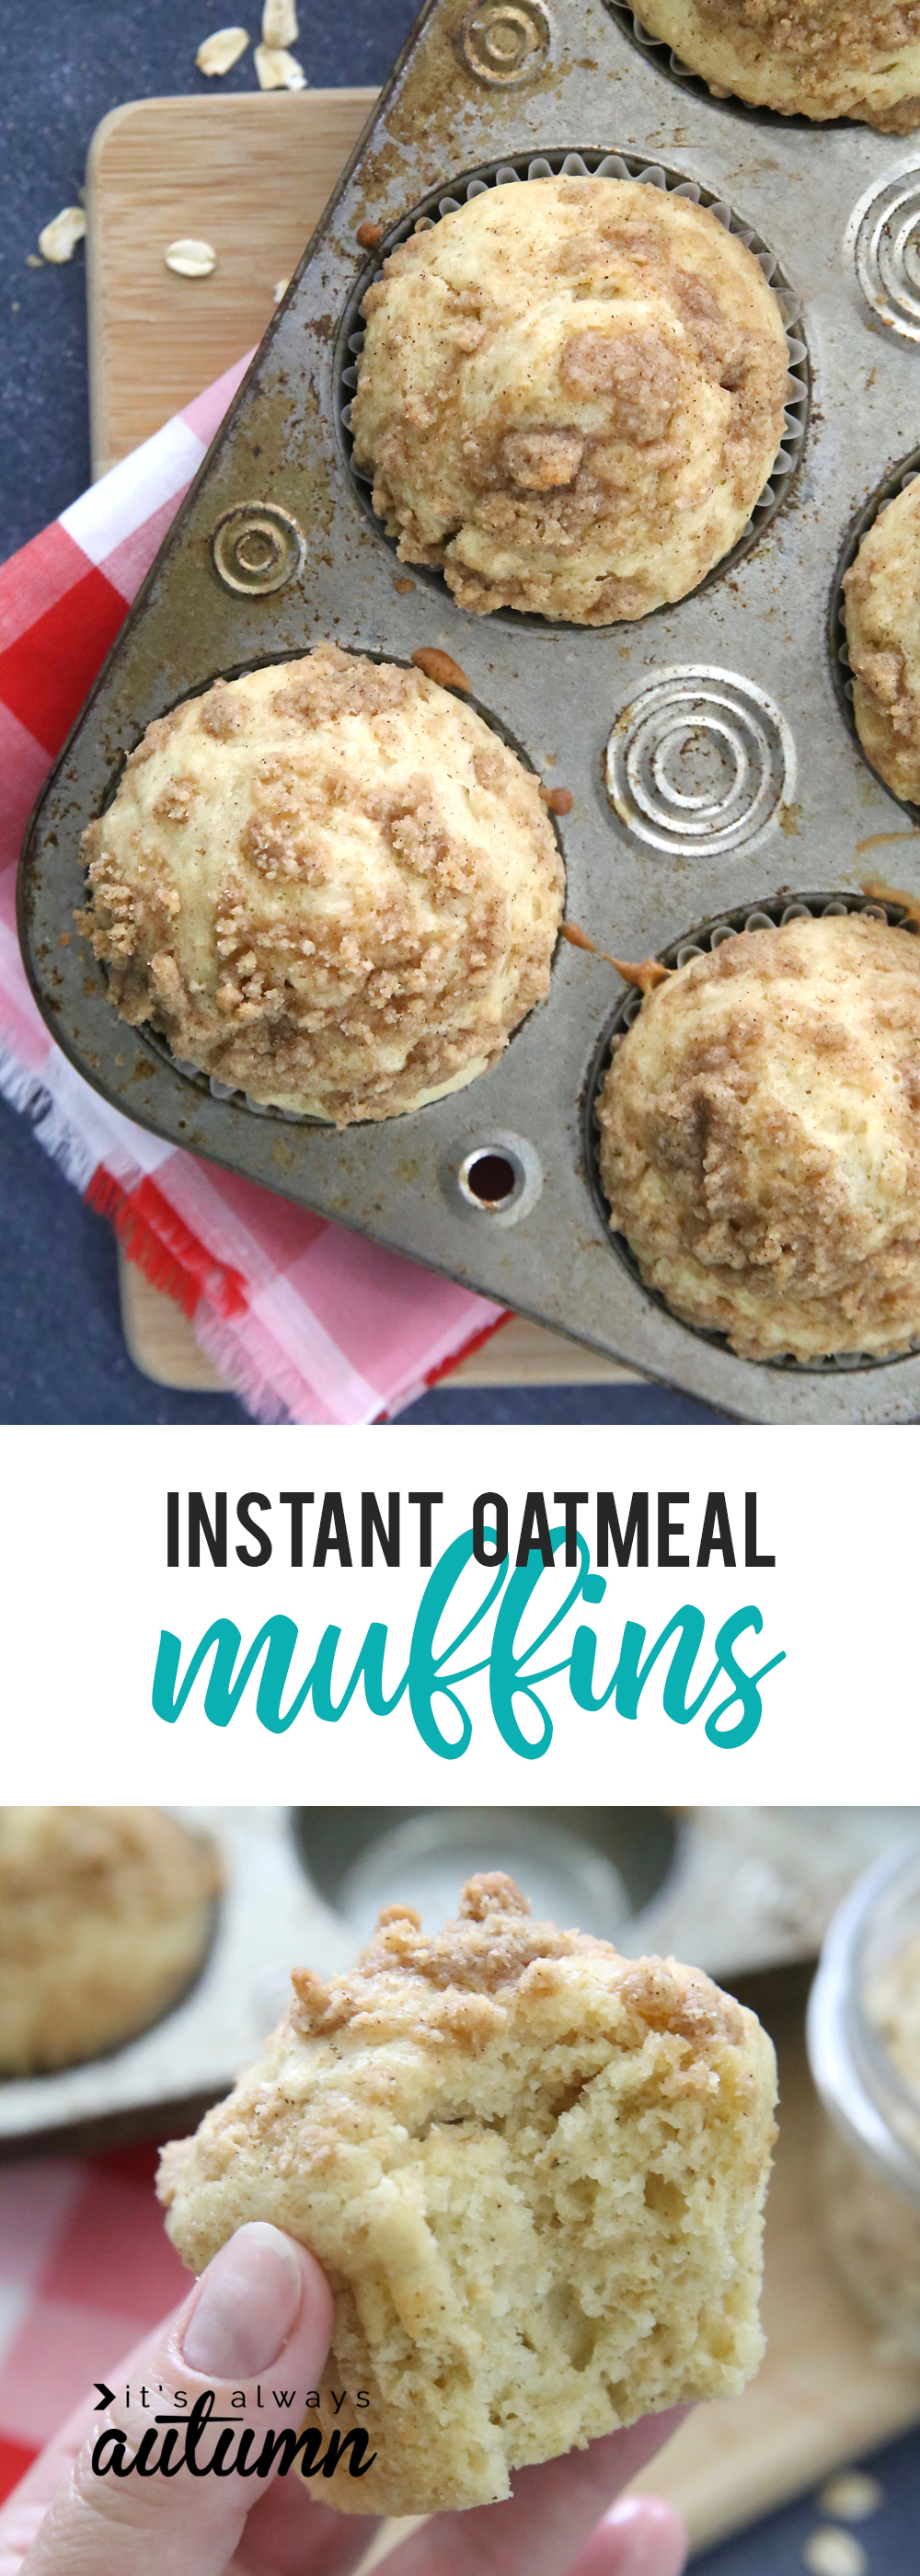 Collage: muffins in a tin; hand holding an instant oatmeal muffin with a bite taken out of it